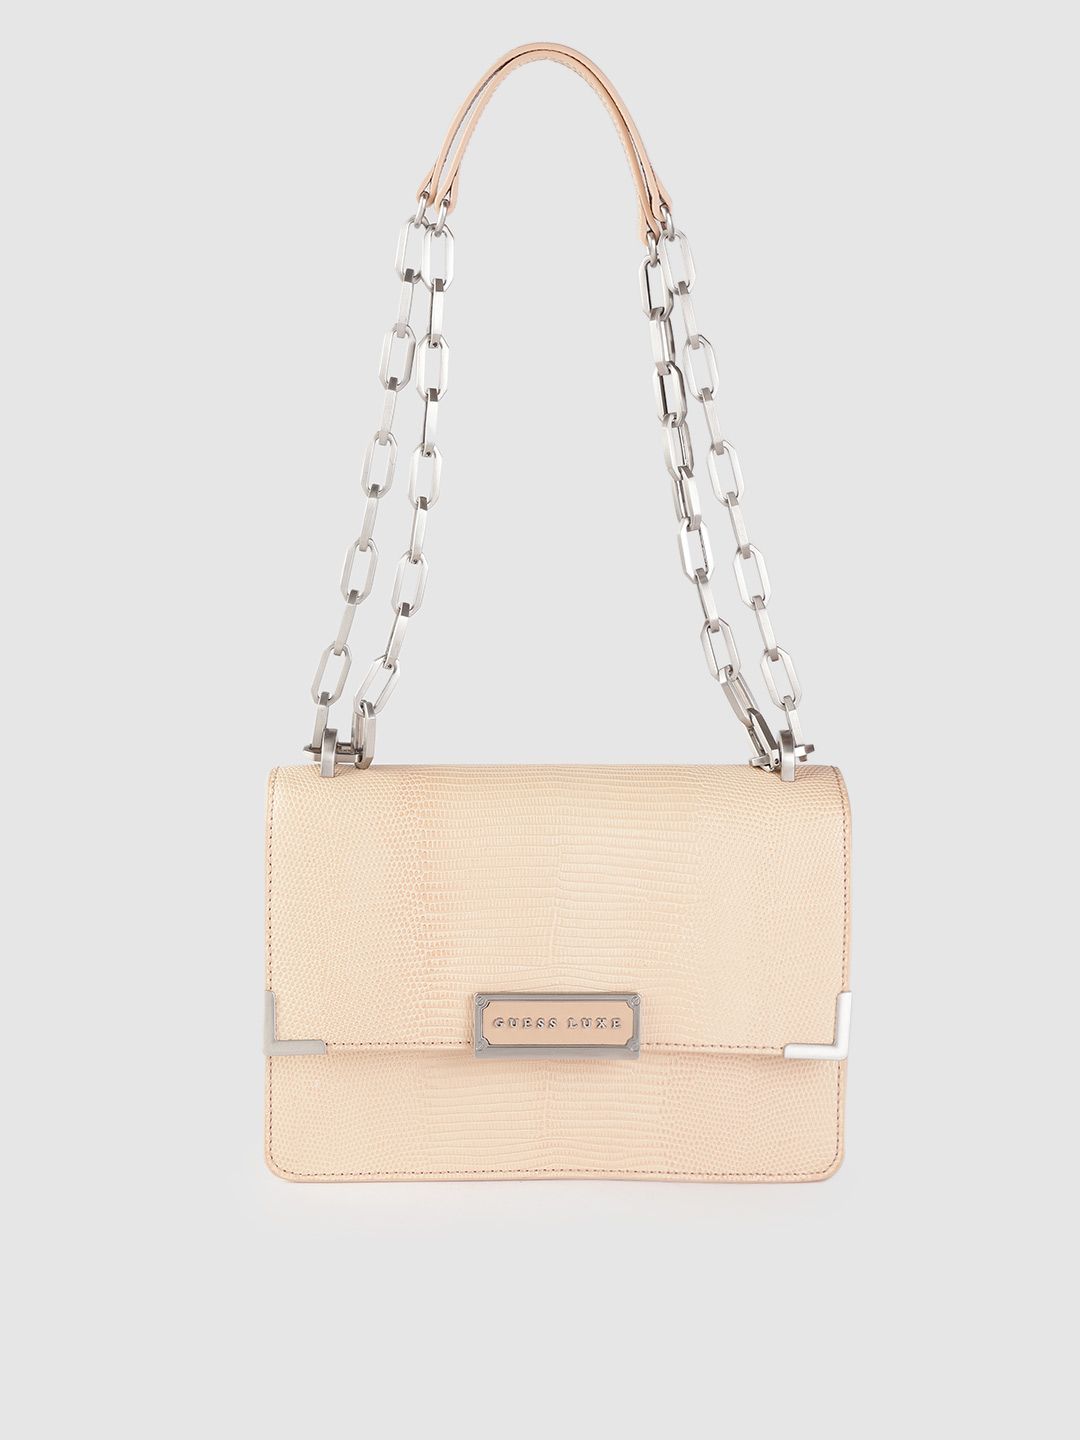 GUESS LUXE Nude-Coloured Snakeskin Textured Leather Shoulder Bag Price in India